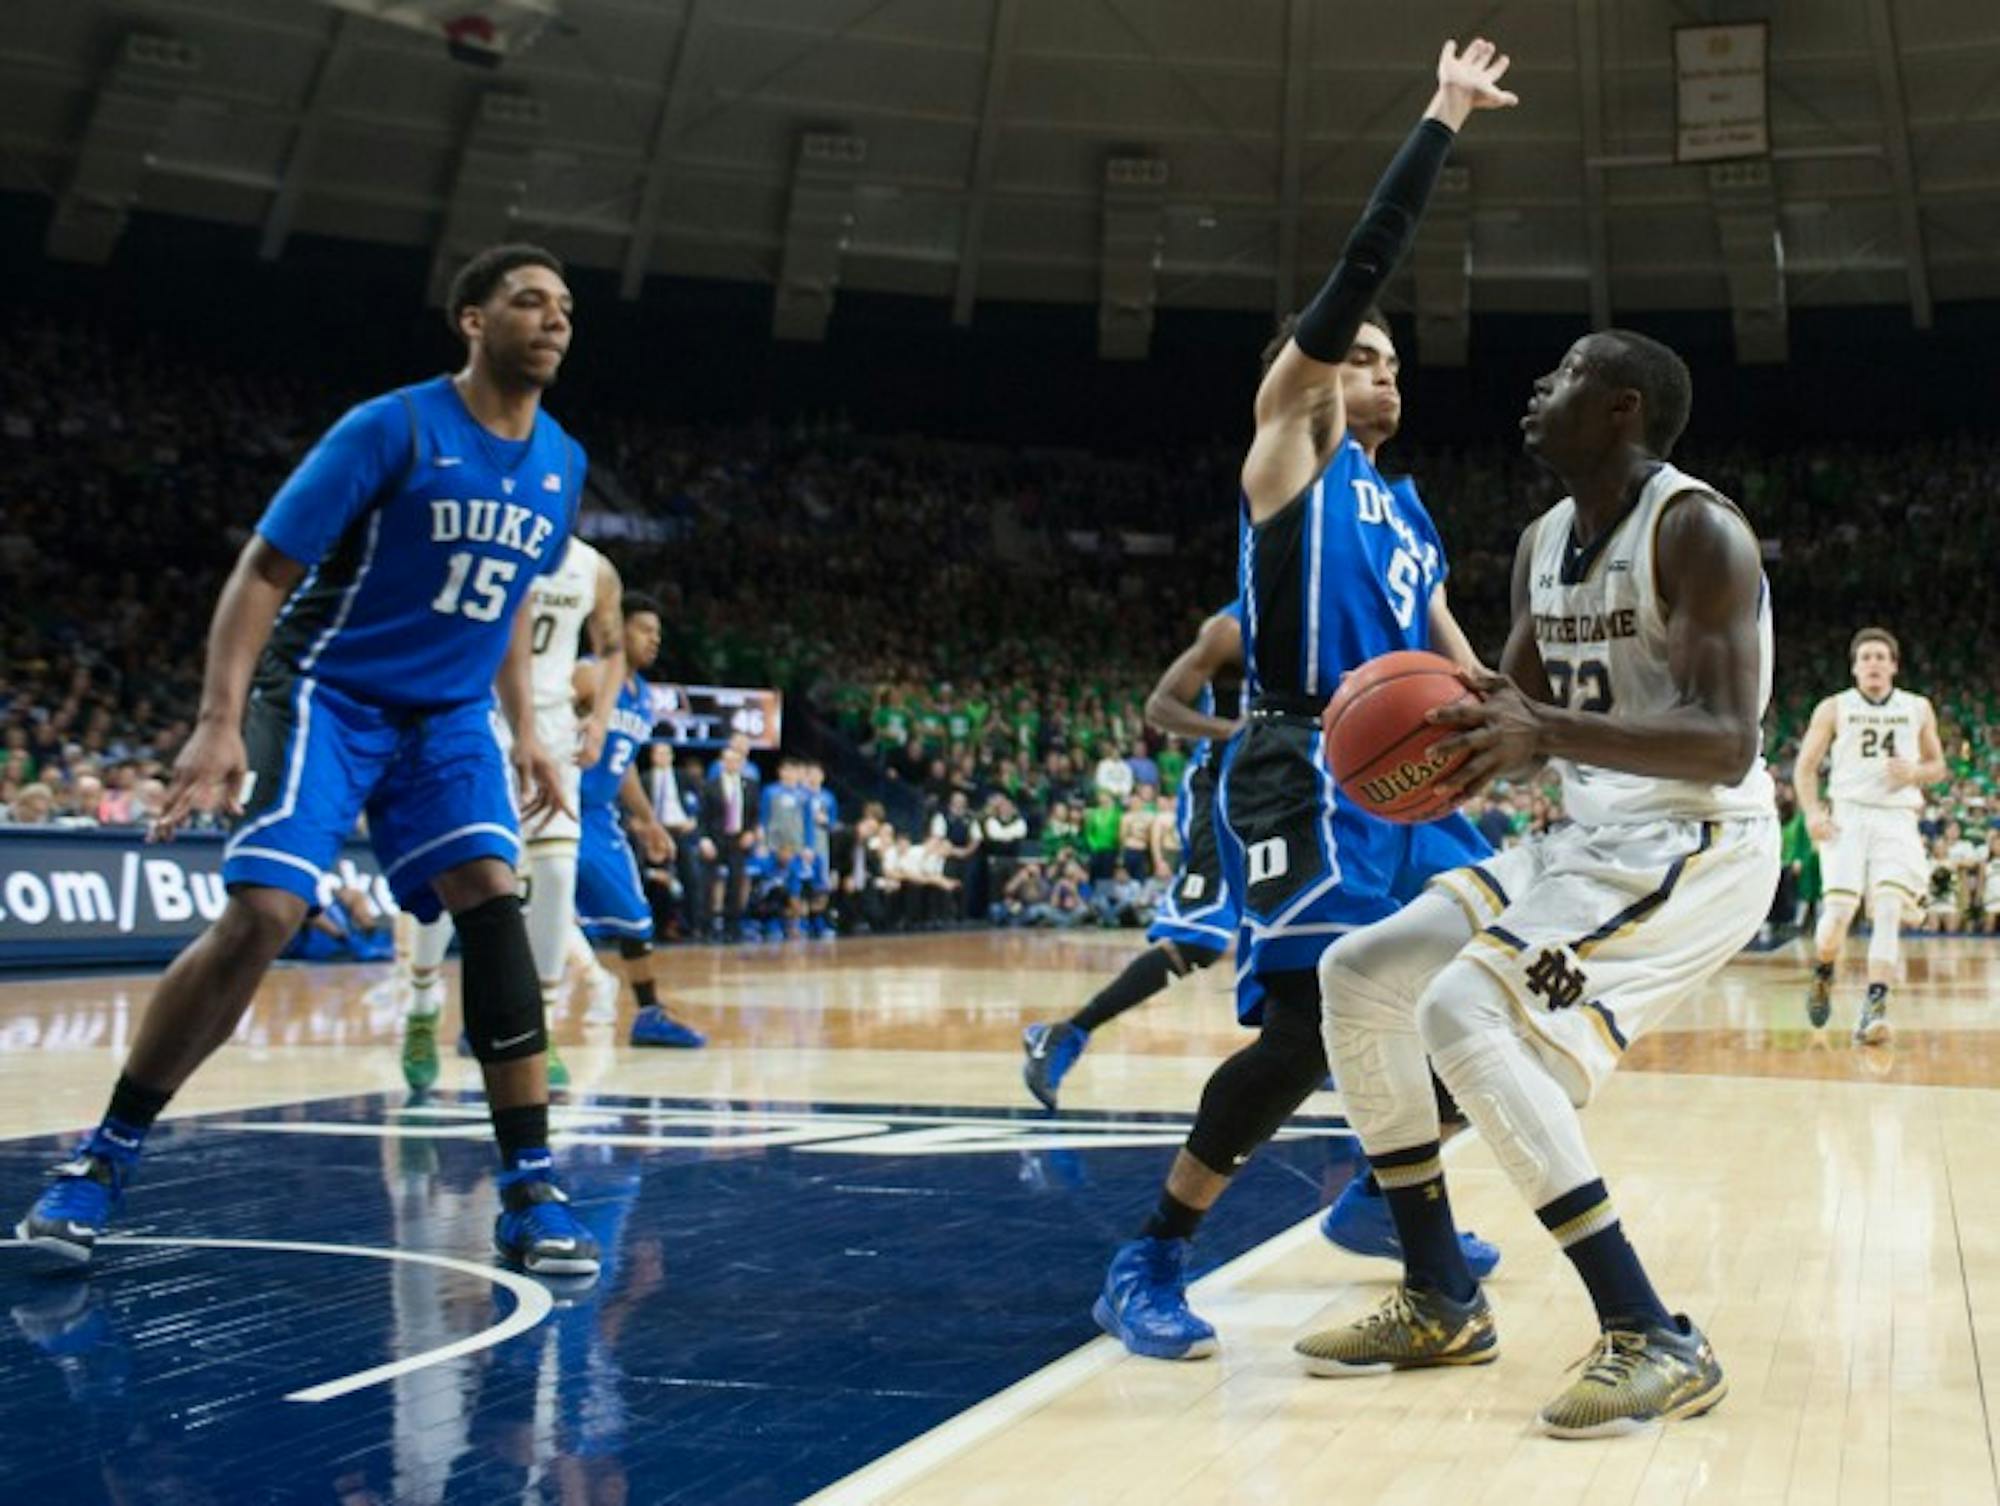 Irish senior guard Jerian Grant looks to shoot during Notre Dame’s 77-73 win over Duke on Jan. 28 at Purcell Pavilion. The Irish lost 90-60 in the return game in Durham, North Carolina, on Saturday.